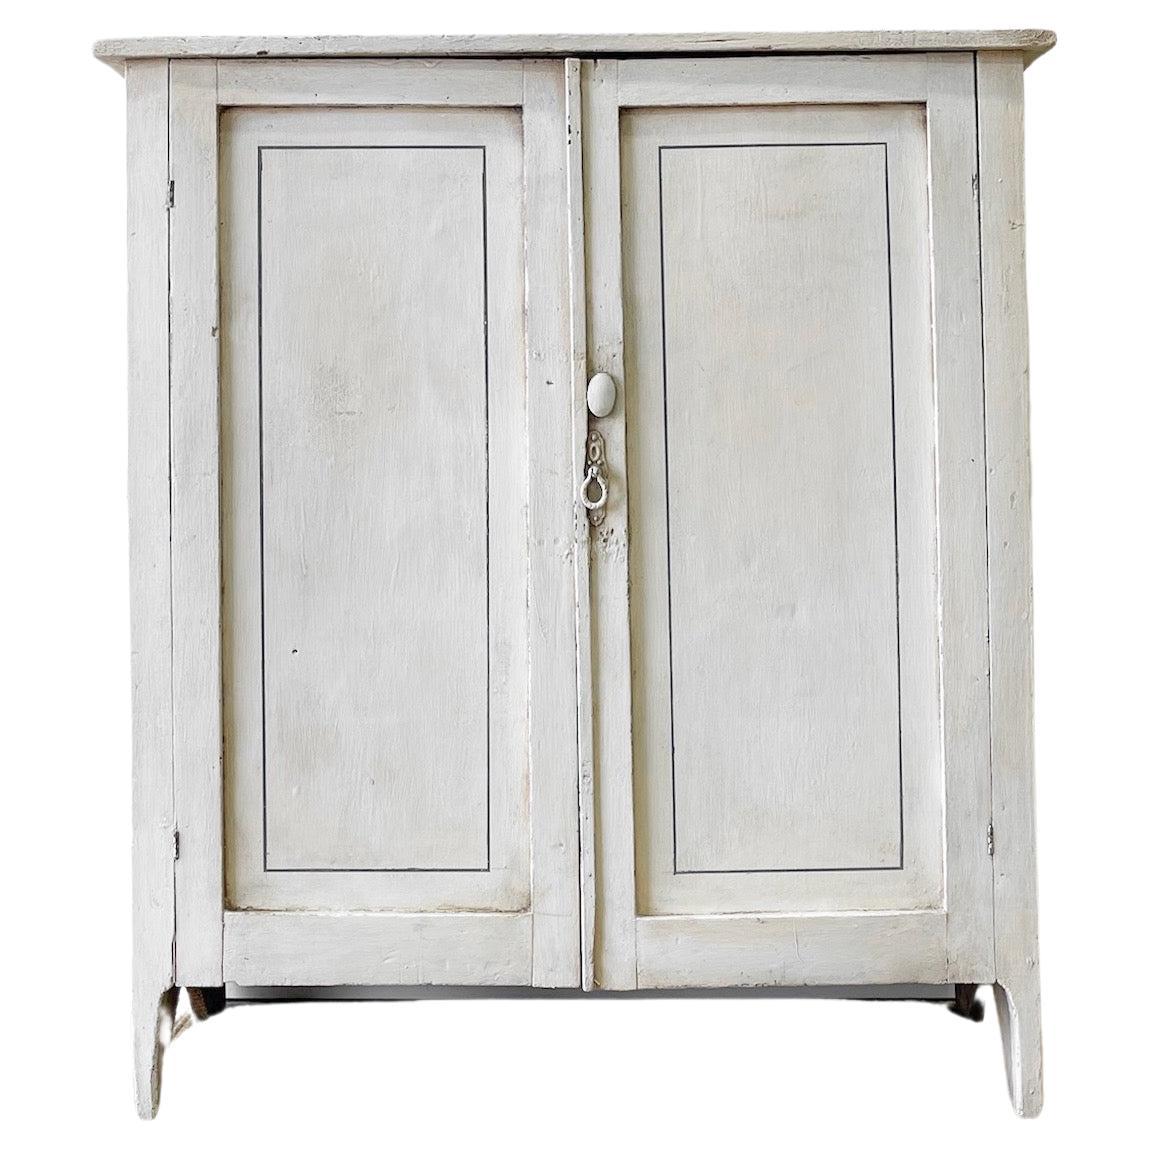 An English Country Pine Cabinet Cupboard